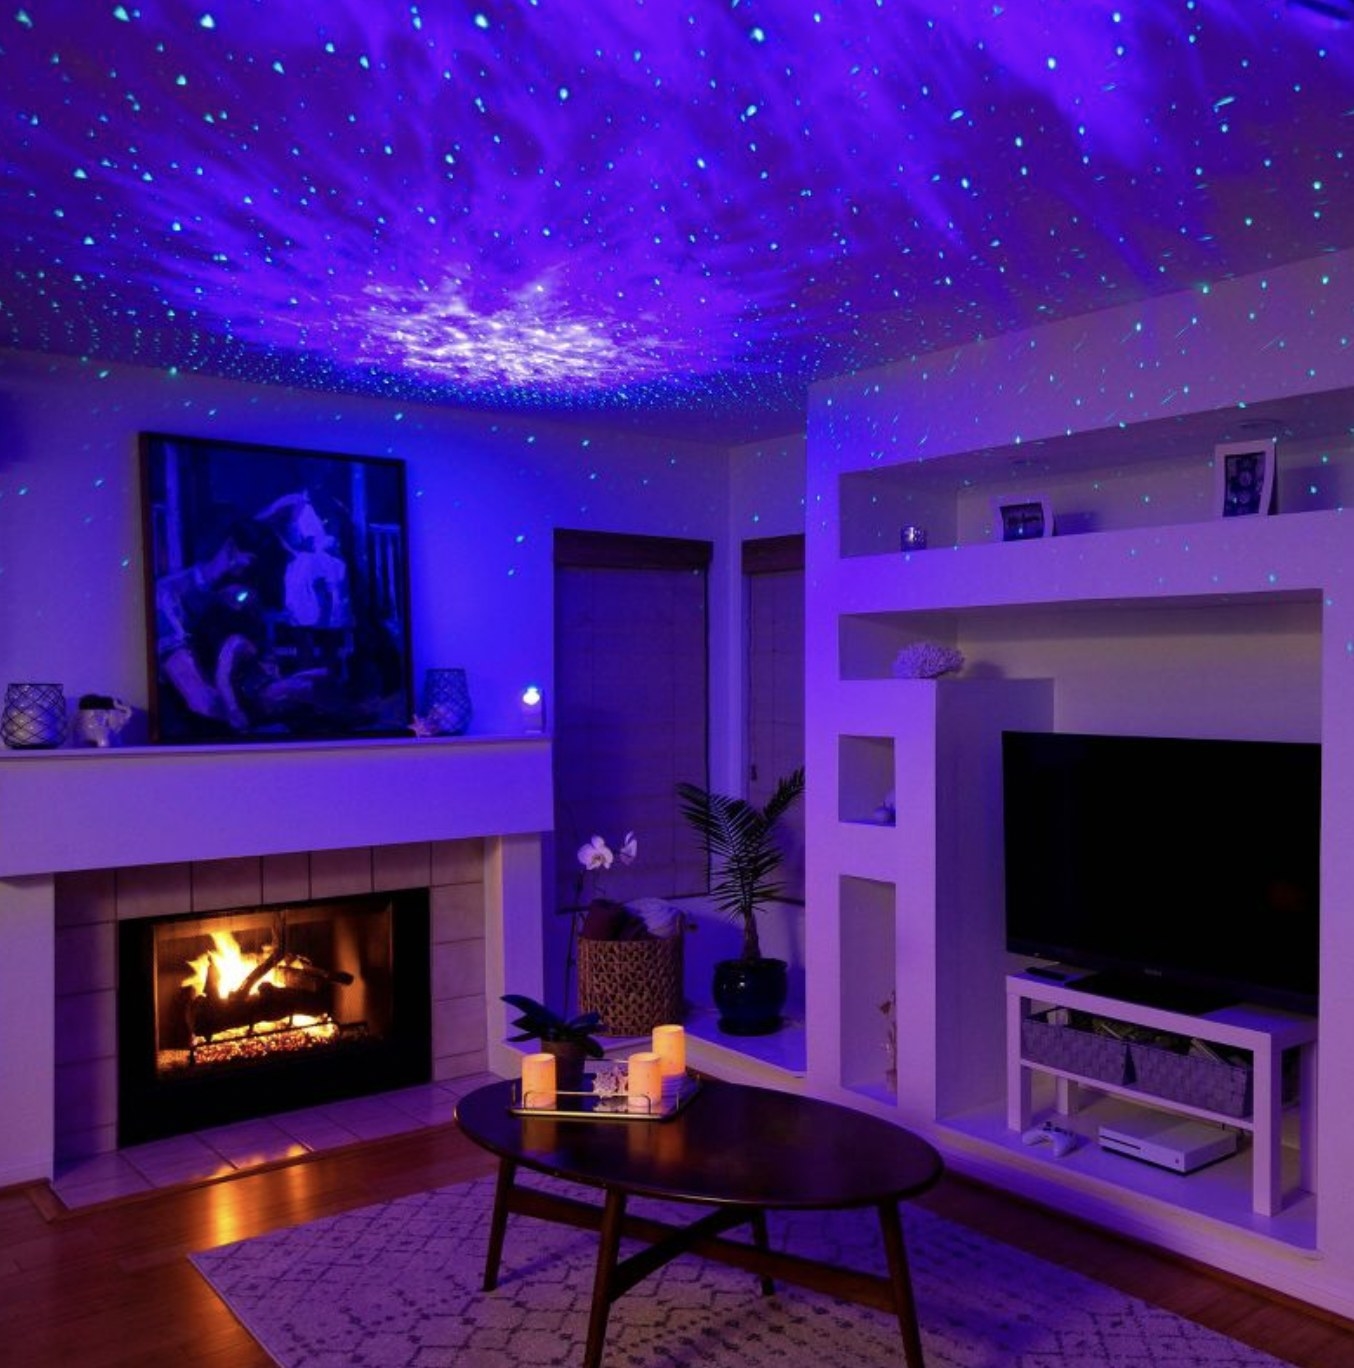 The projector creating purple blue lights on the ceiling and throughout the living room